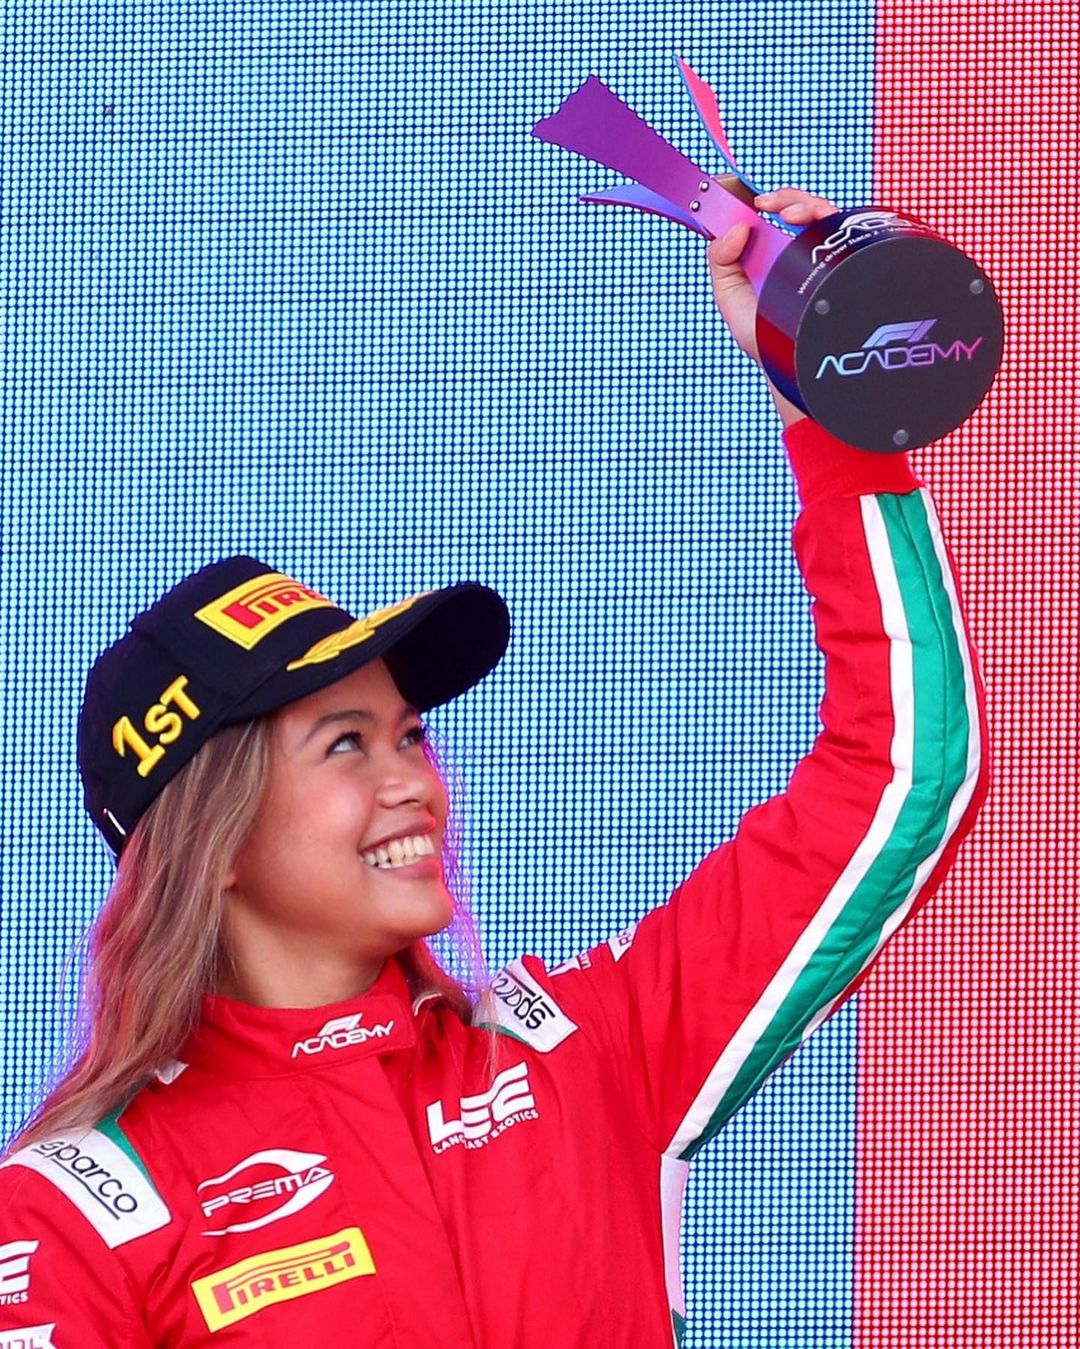 Bianca Bustamante celebrating her first win in the F1 Academy